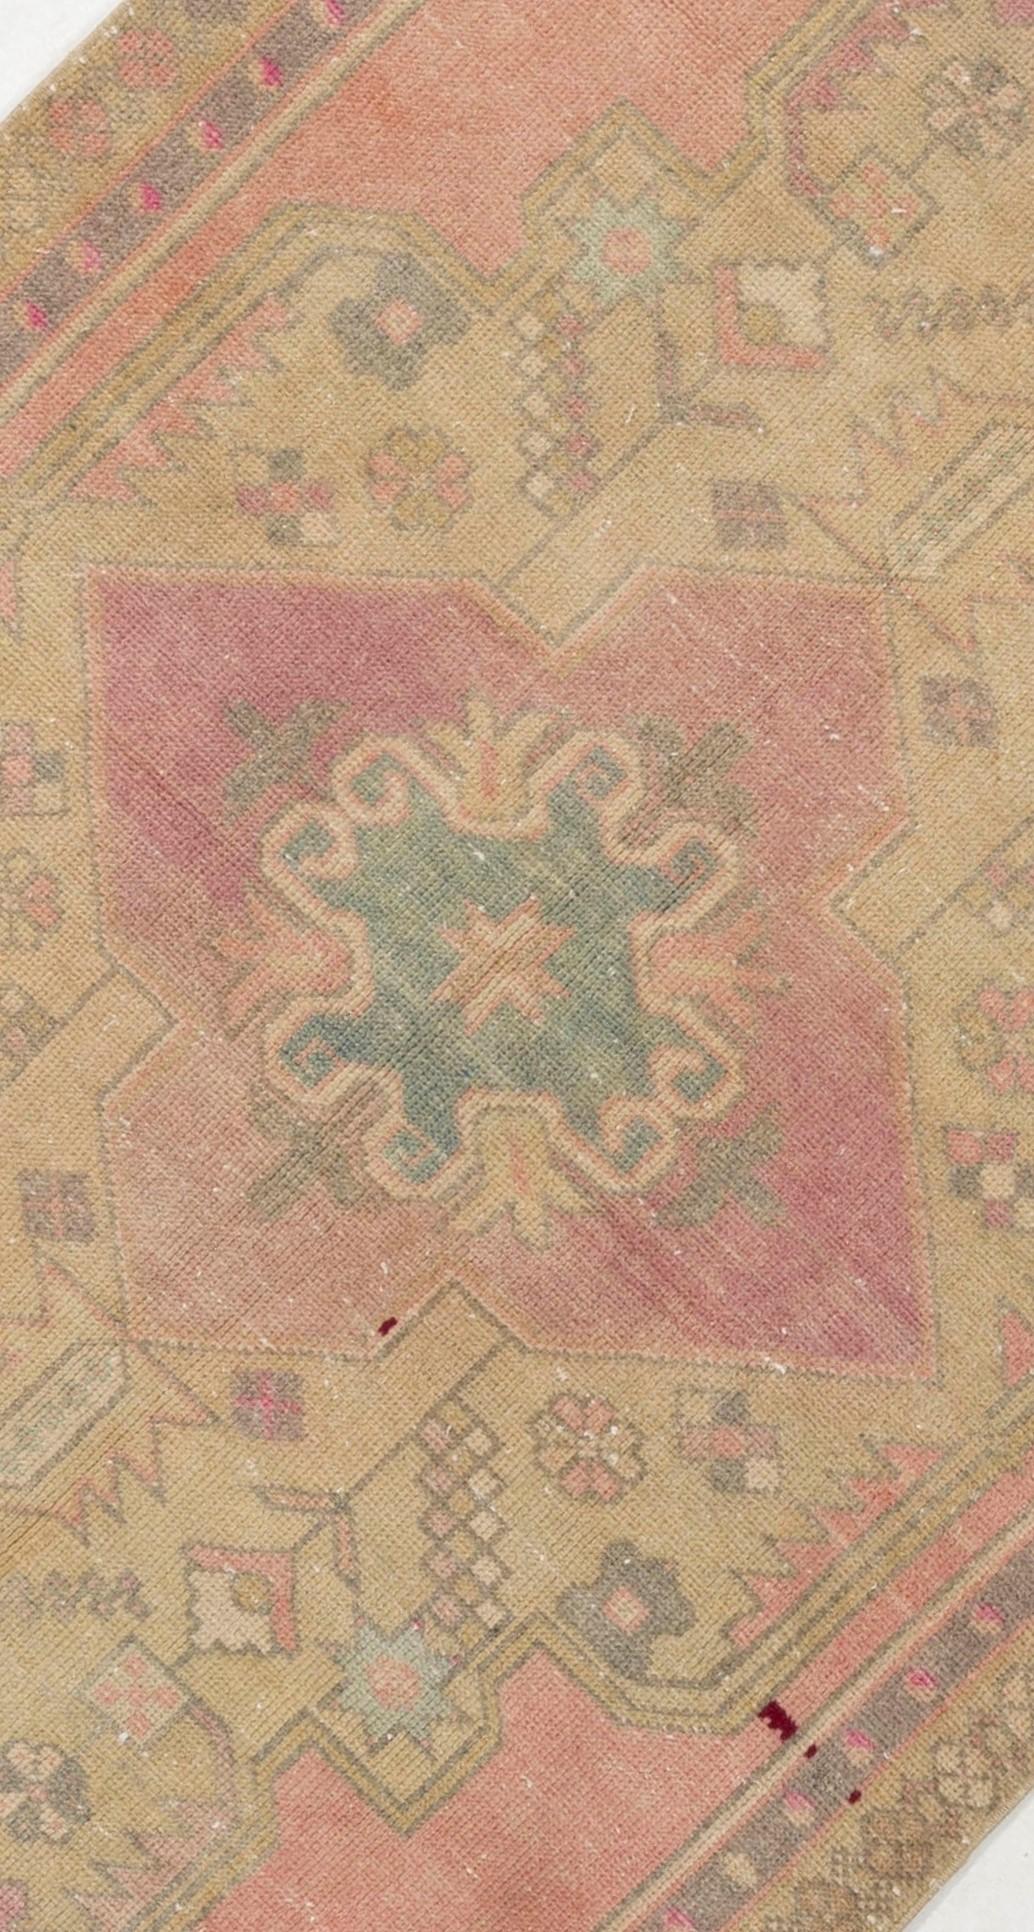 Mid-20th Century Vintage Hand Knotted Turkish Area Rug in Pink with Geometric Design. 4'4